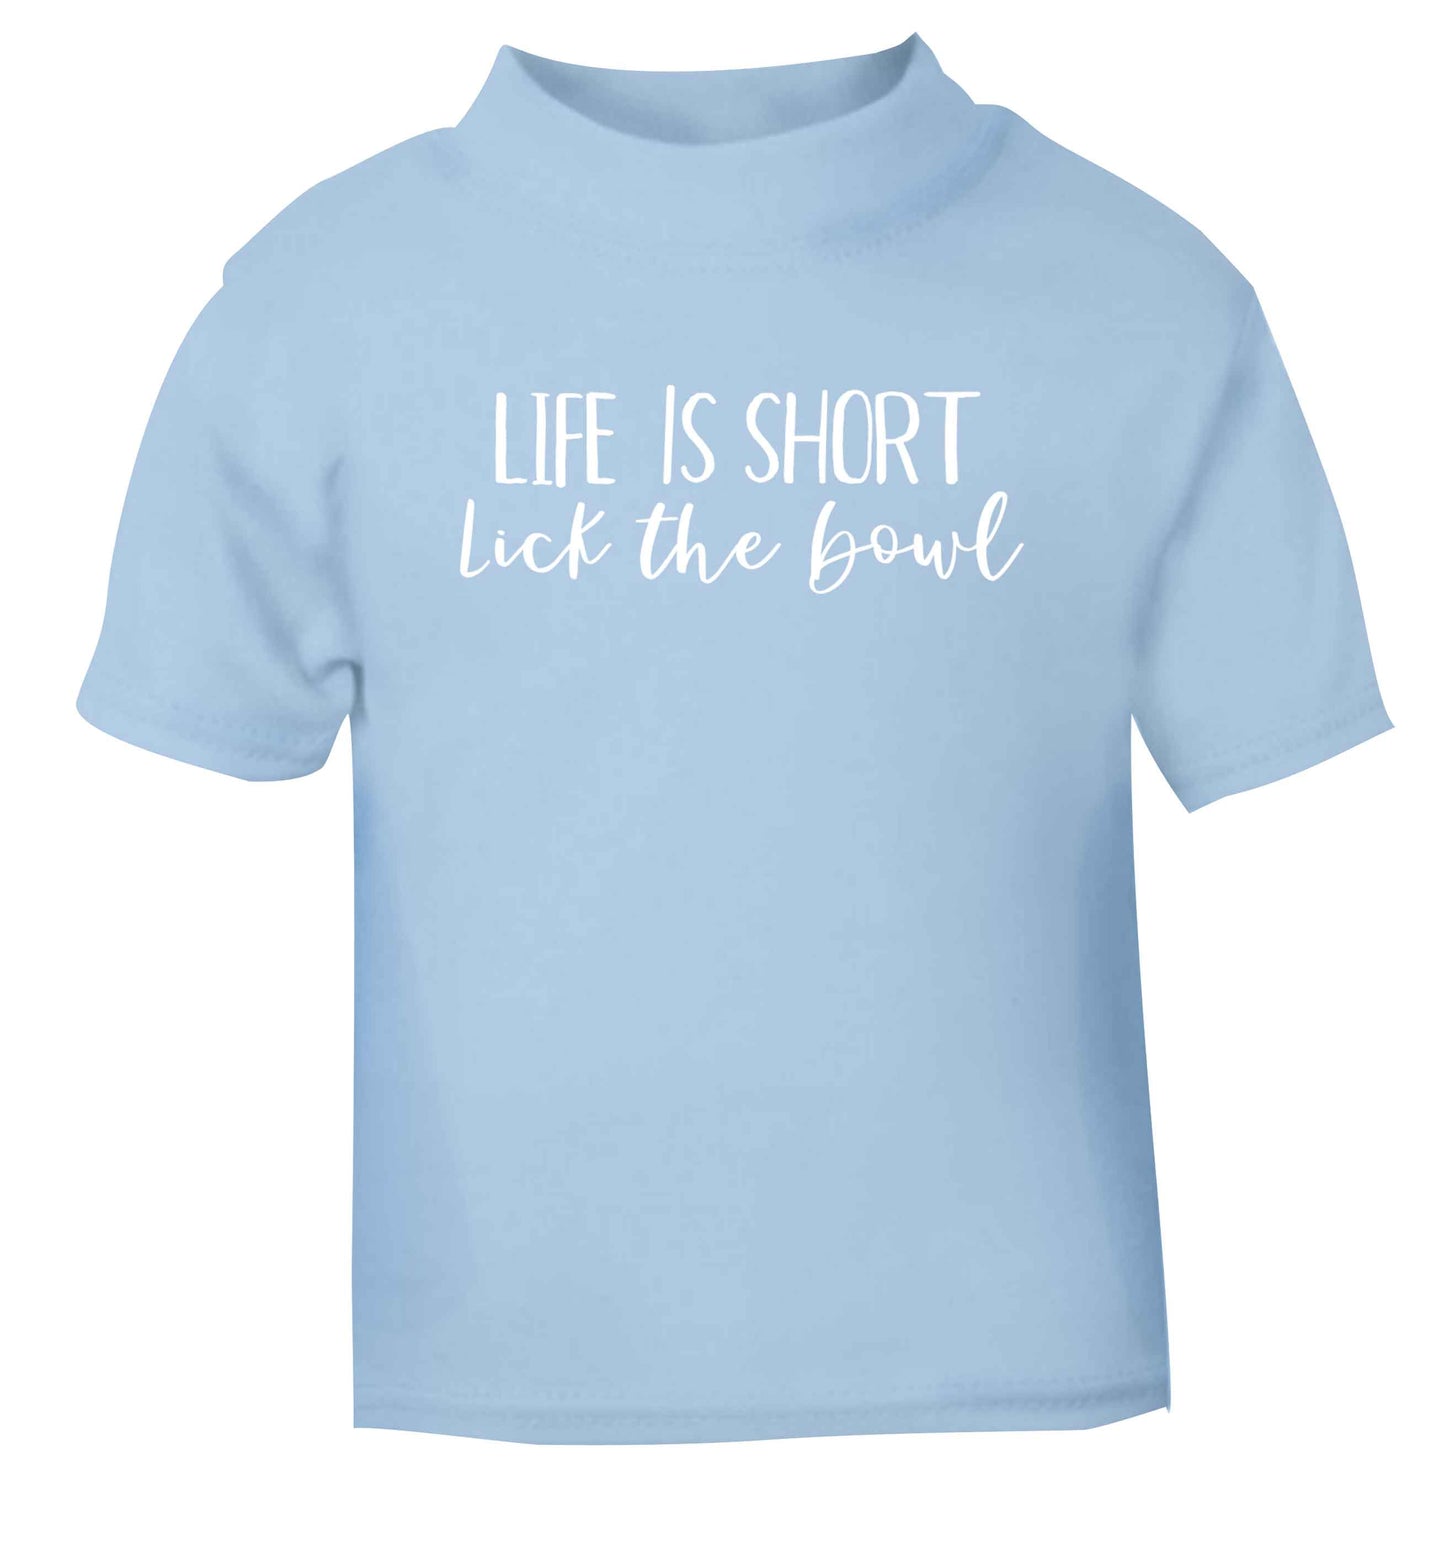 Life is short lick the bowl light blue Baby Toddler Tshirt 2 Years